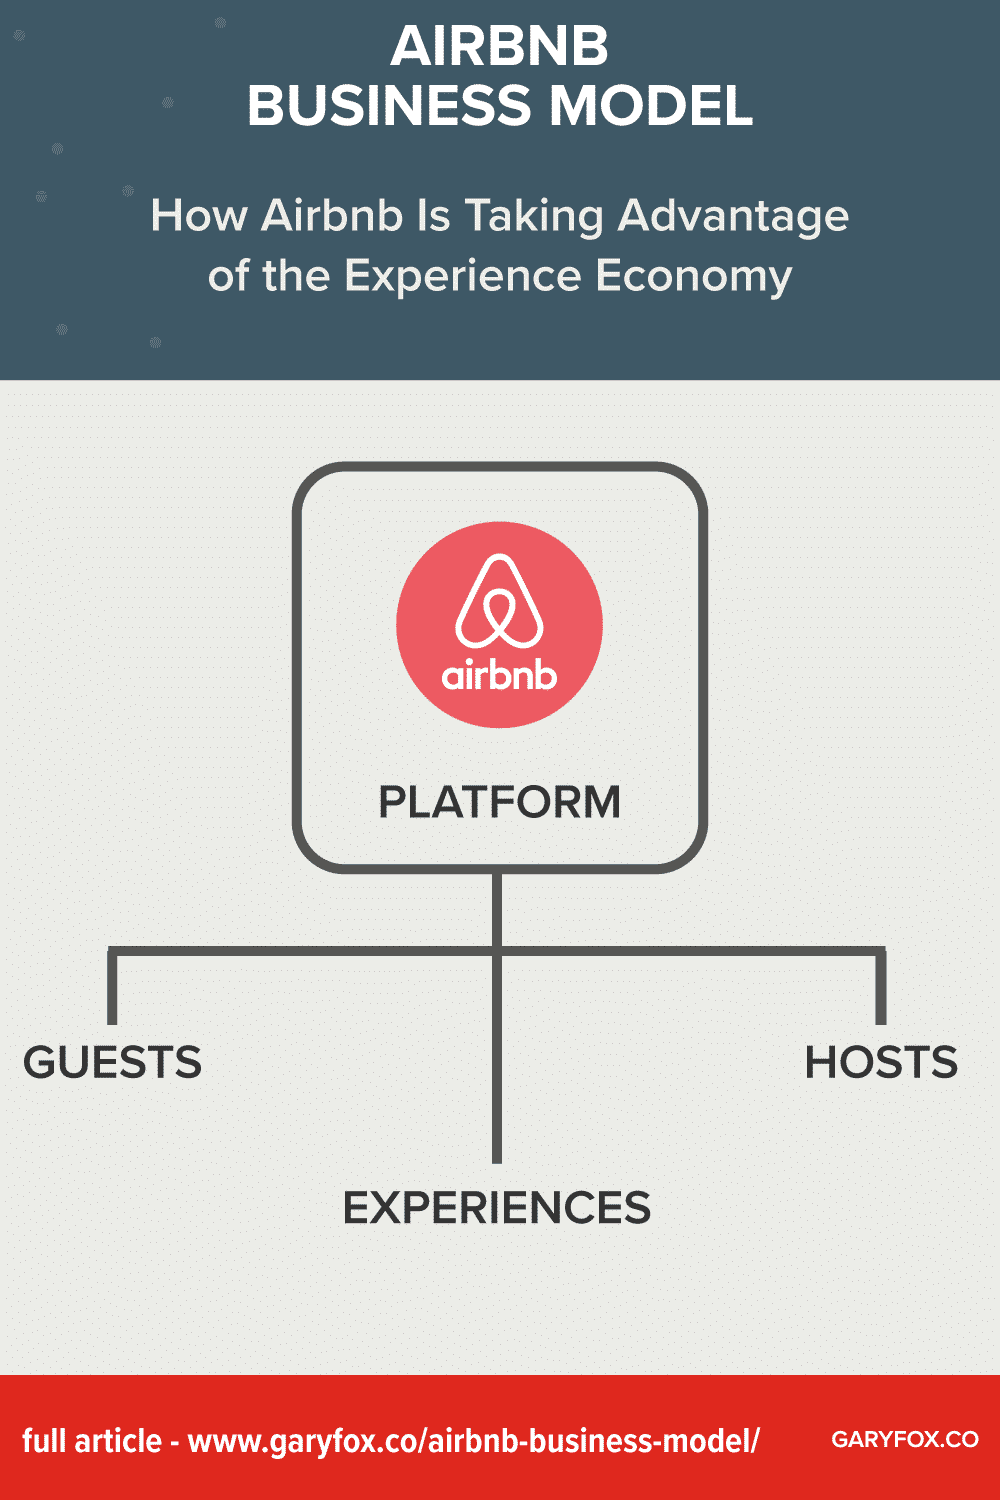 Airbnb Business Model: How Airbnb Makes Money